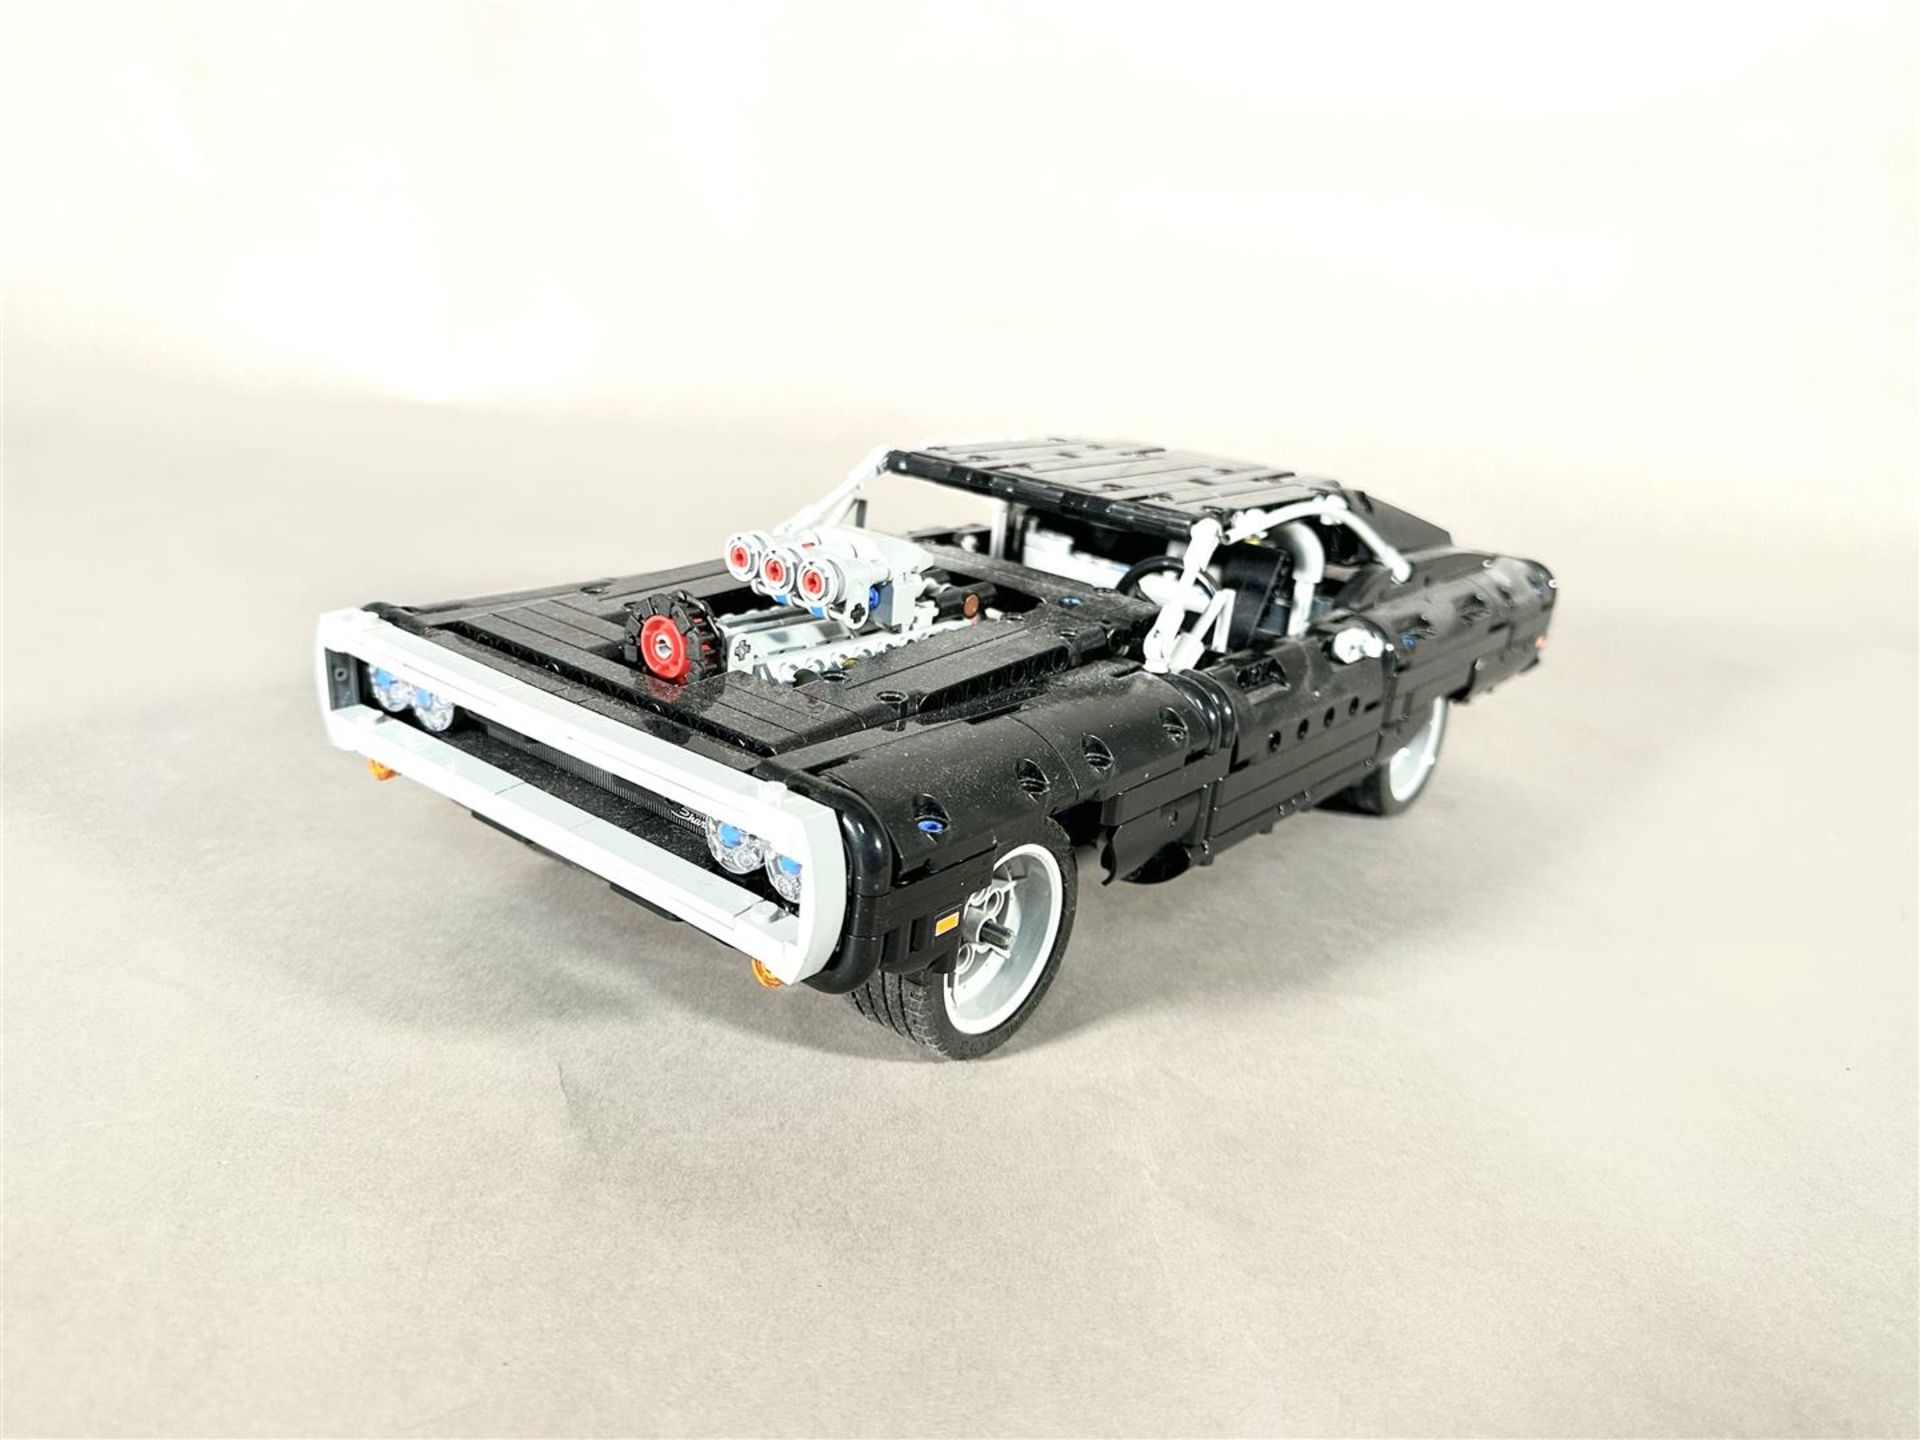 LEGO - Technic 42111 - Fast & Furious - Dom's Dodge Charger - Image 2 of 9